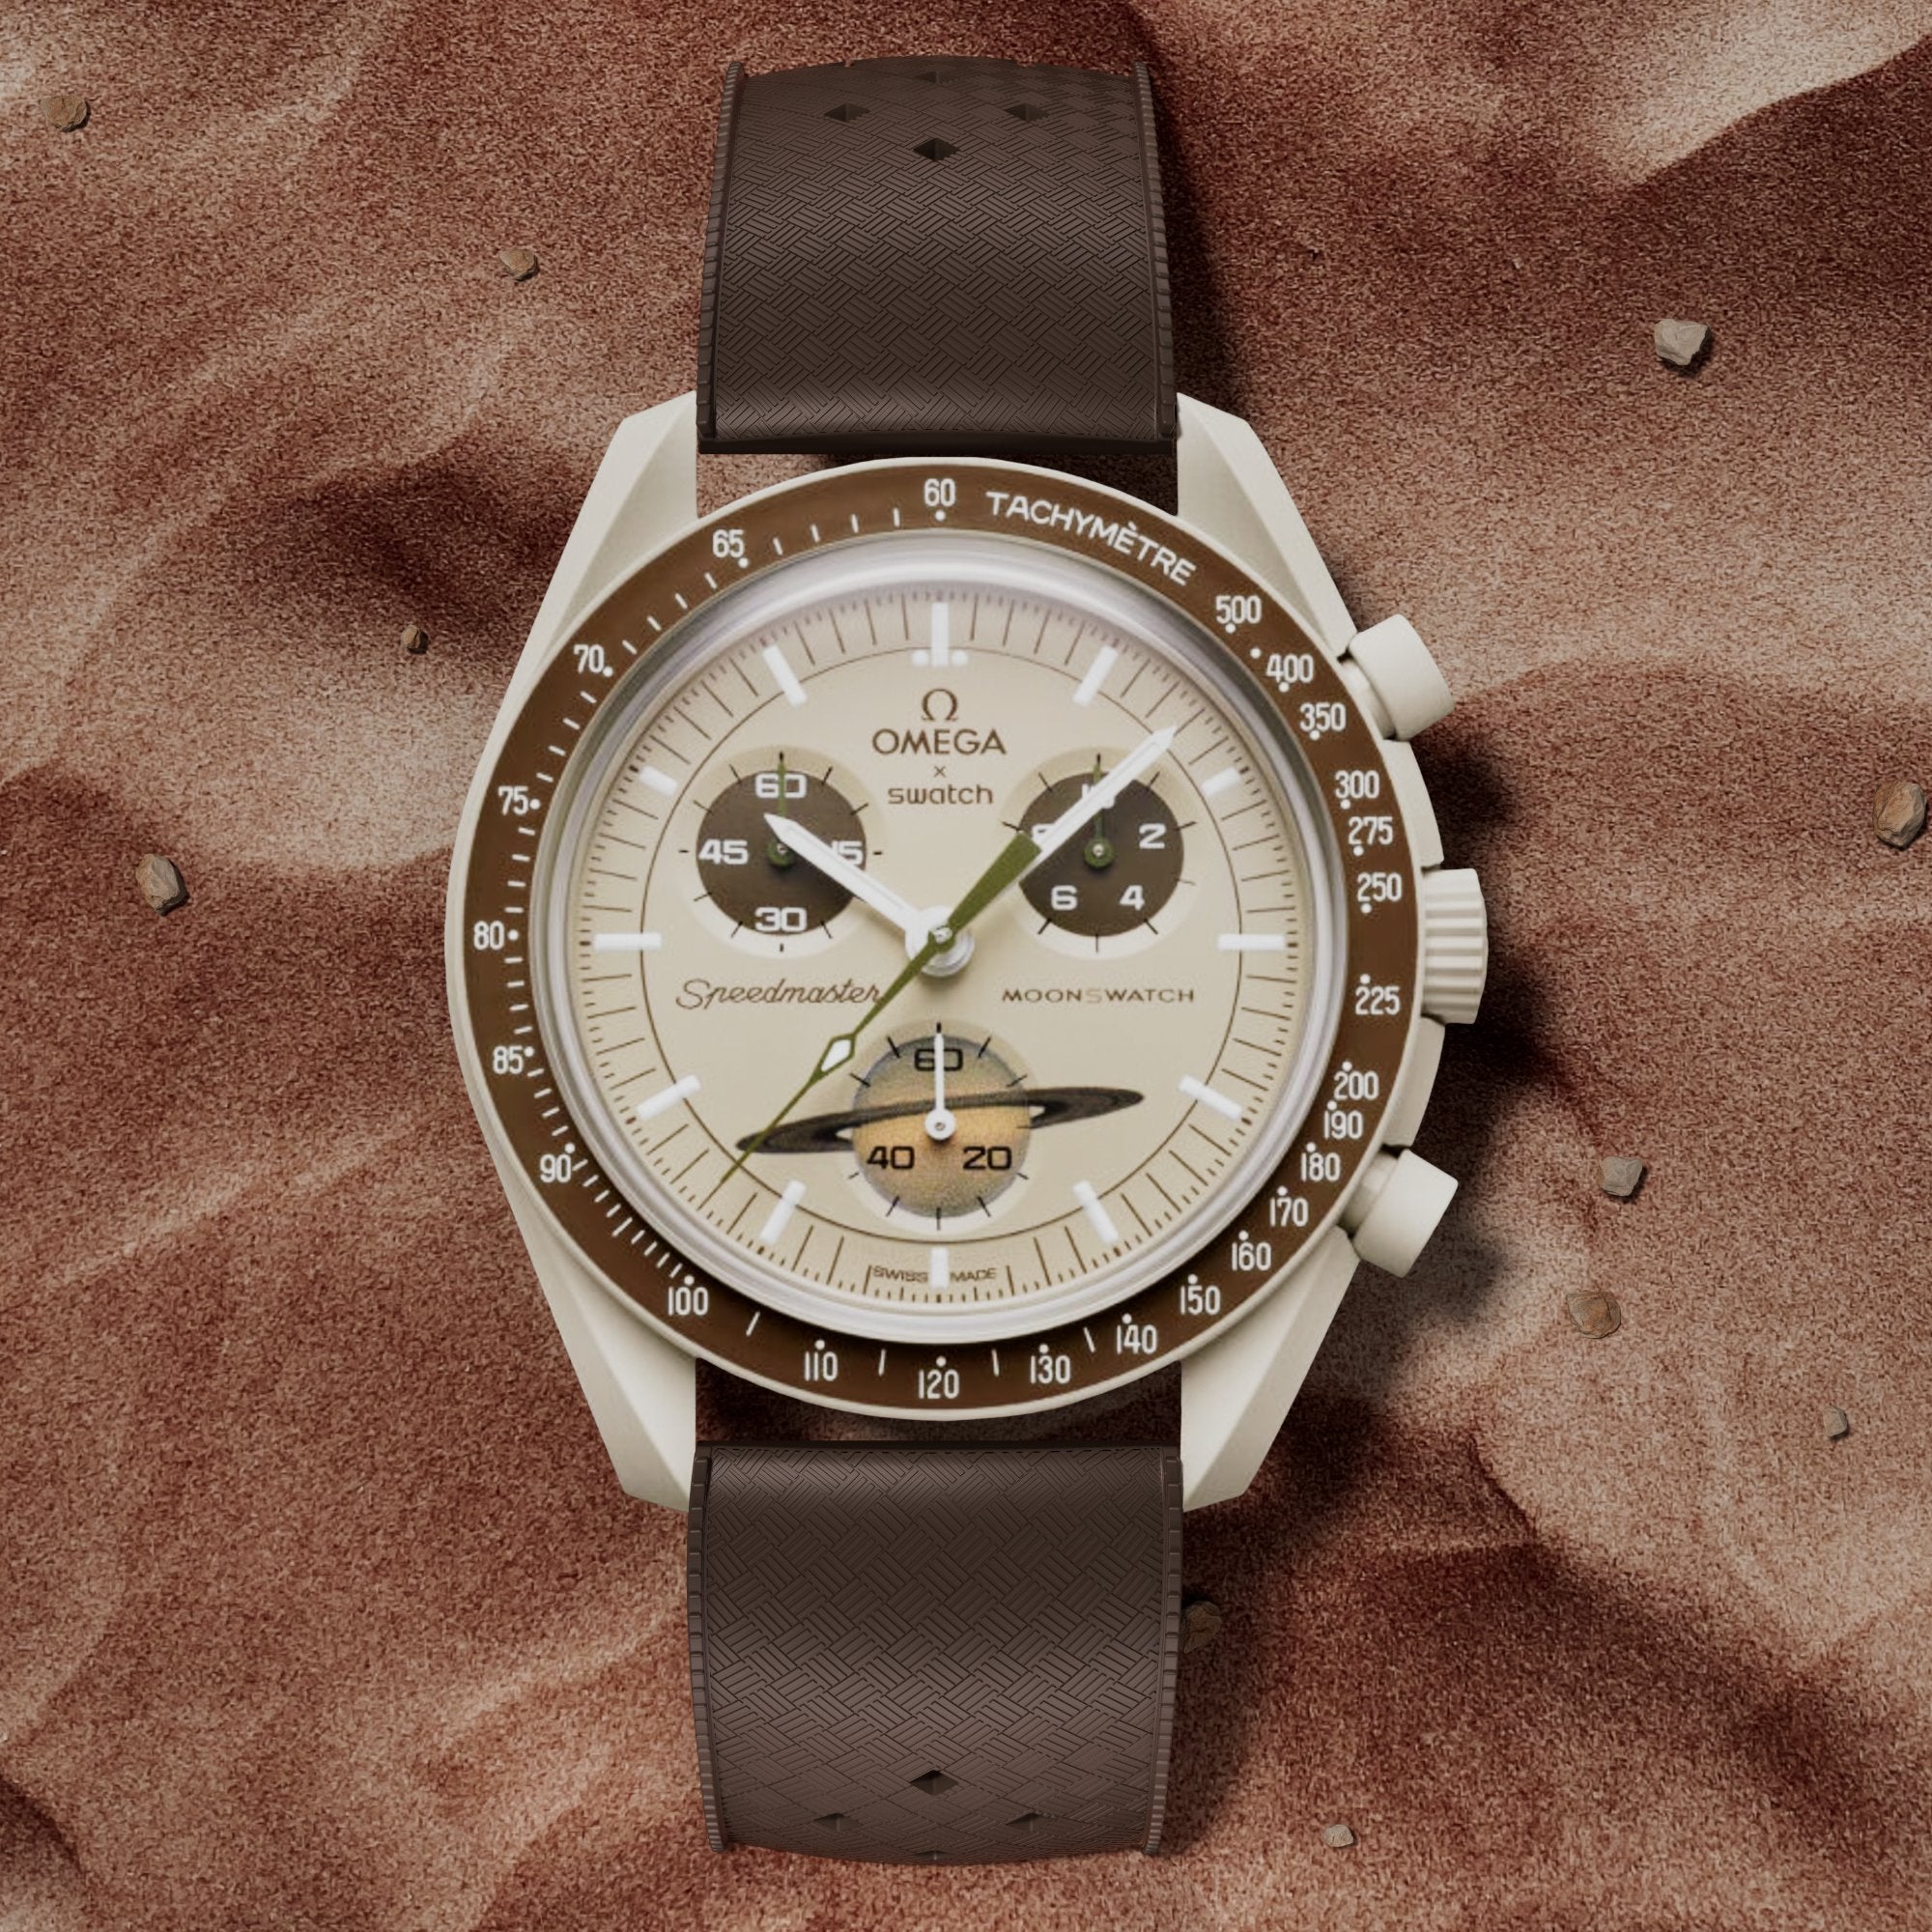 Calypso Tropical Style FKM Rubber Strap- Quick-Release-Compatible with Omega x Swatch - Dark Brown (2422) -Strapseeker